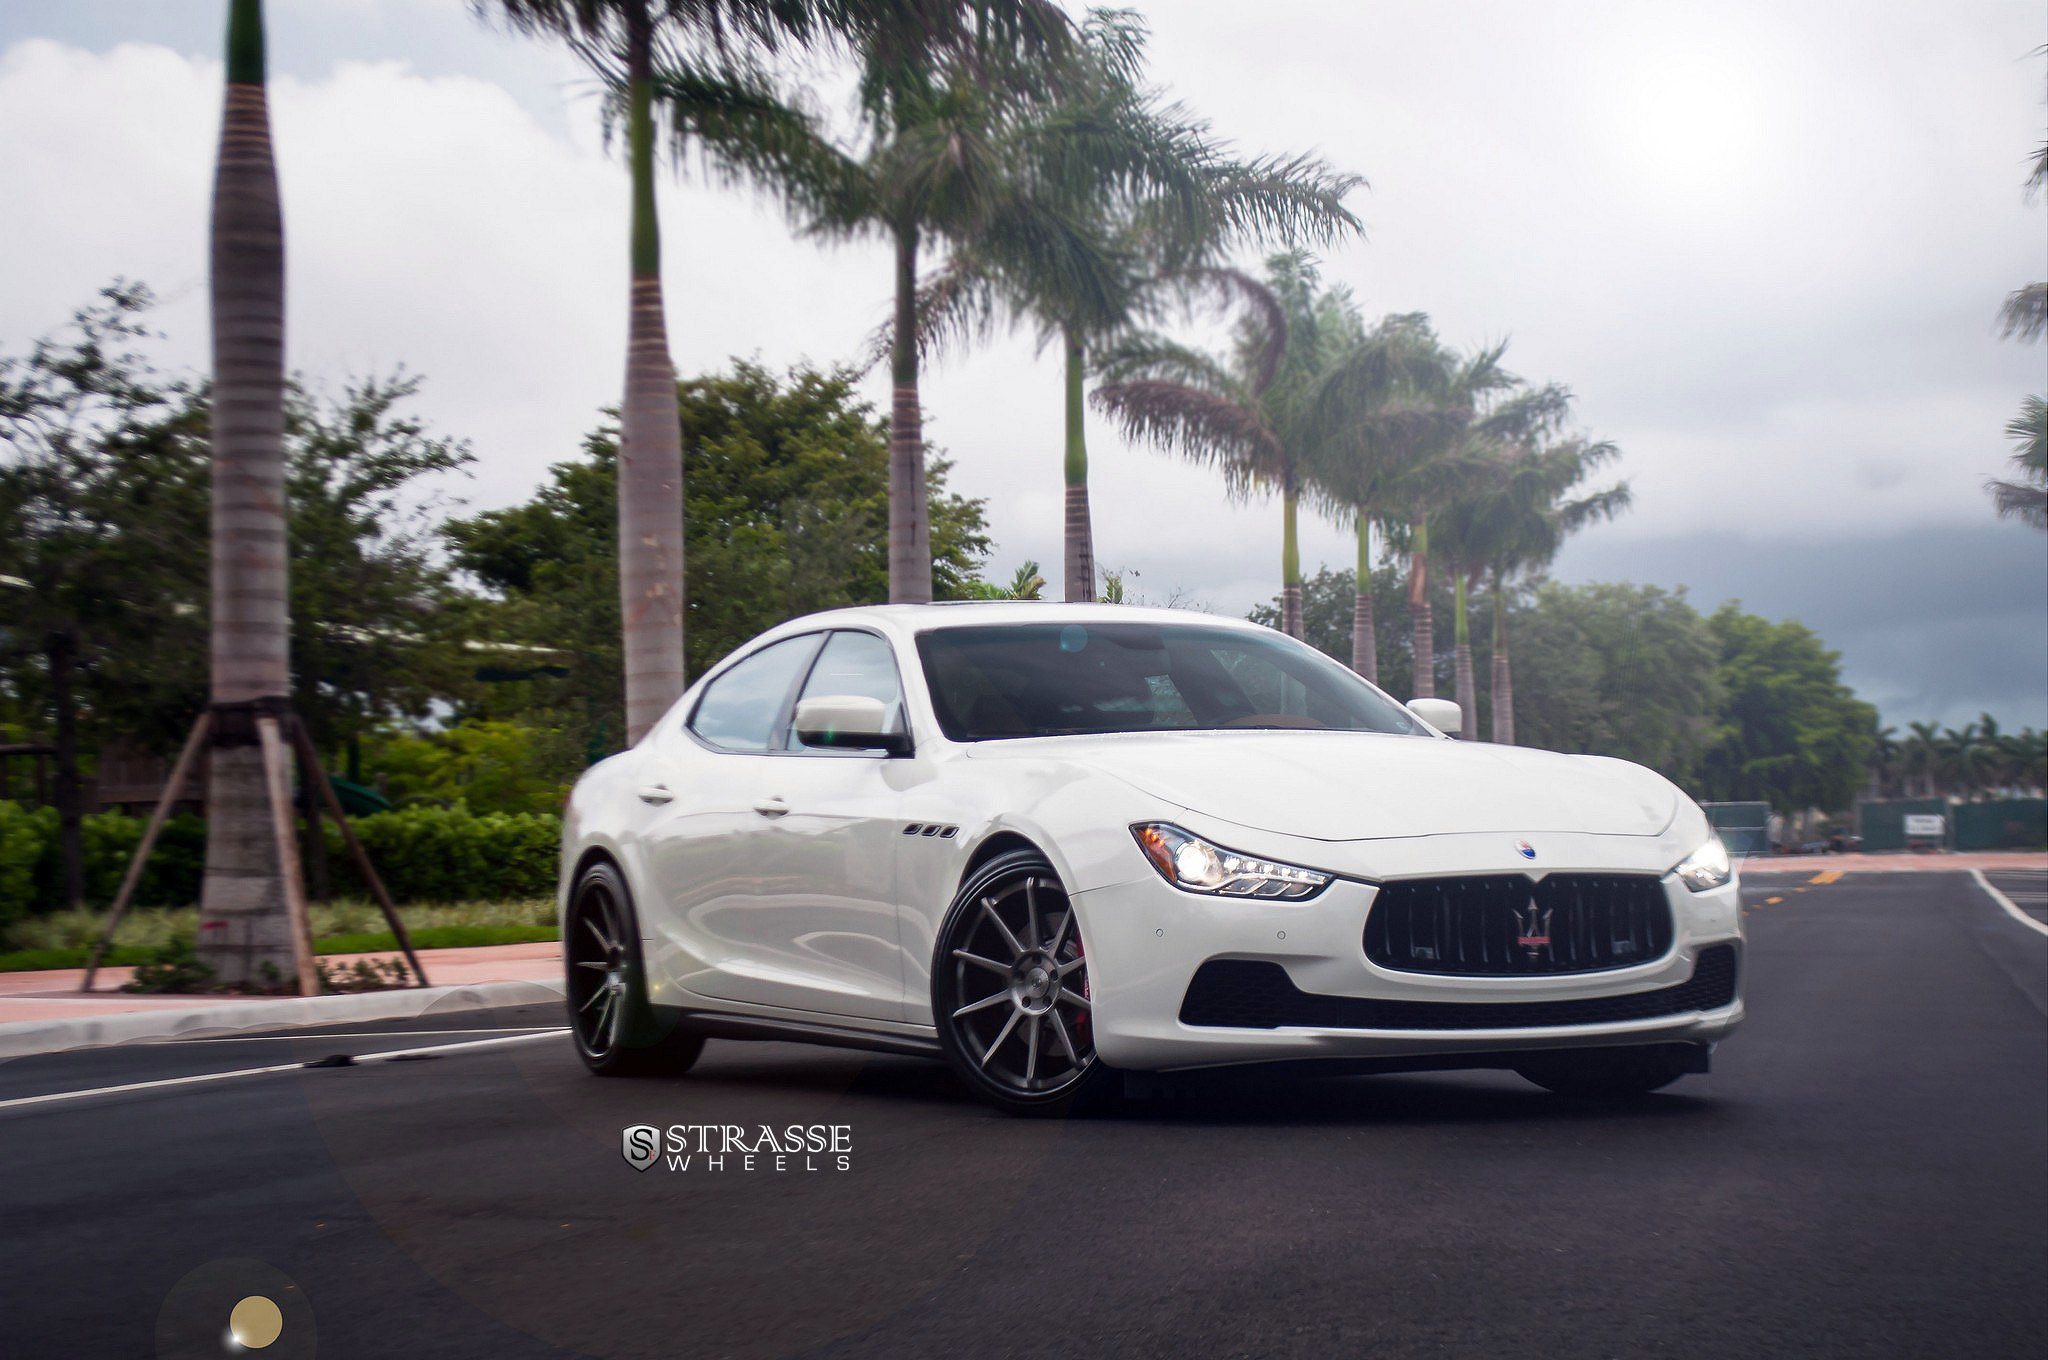 Aftermarket Front Lip on White Maserati Ghibli - Photo by Strasse Forged